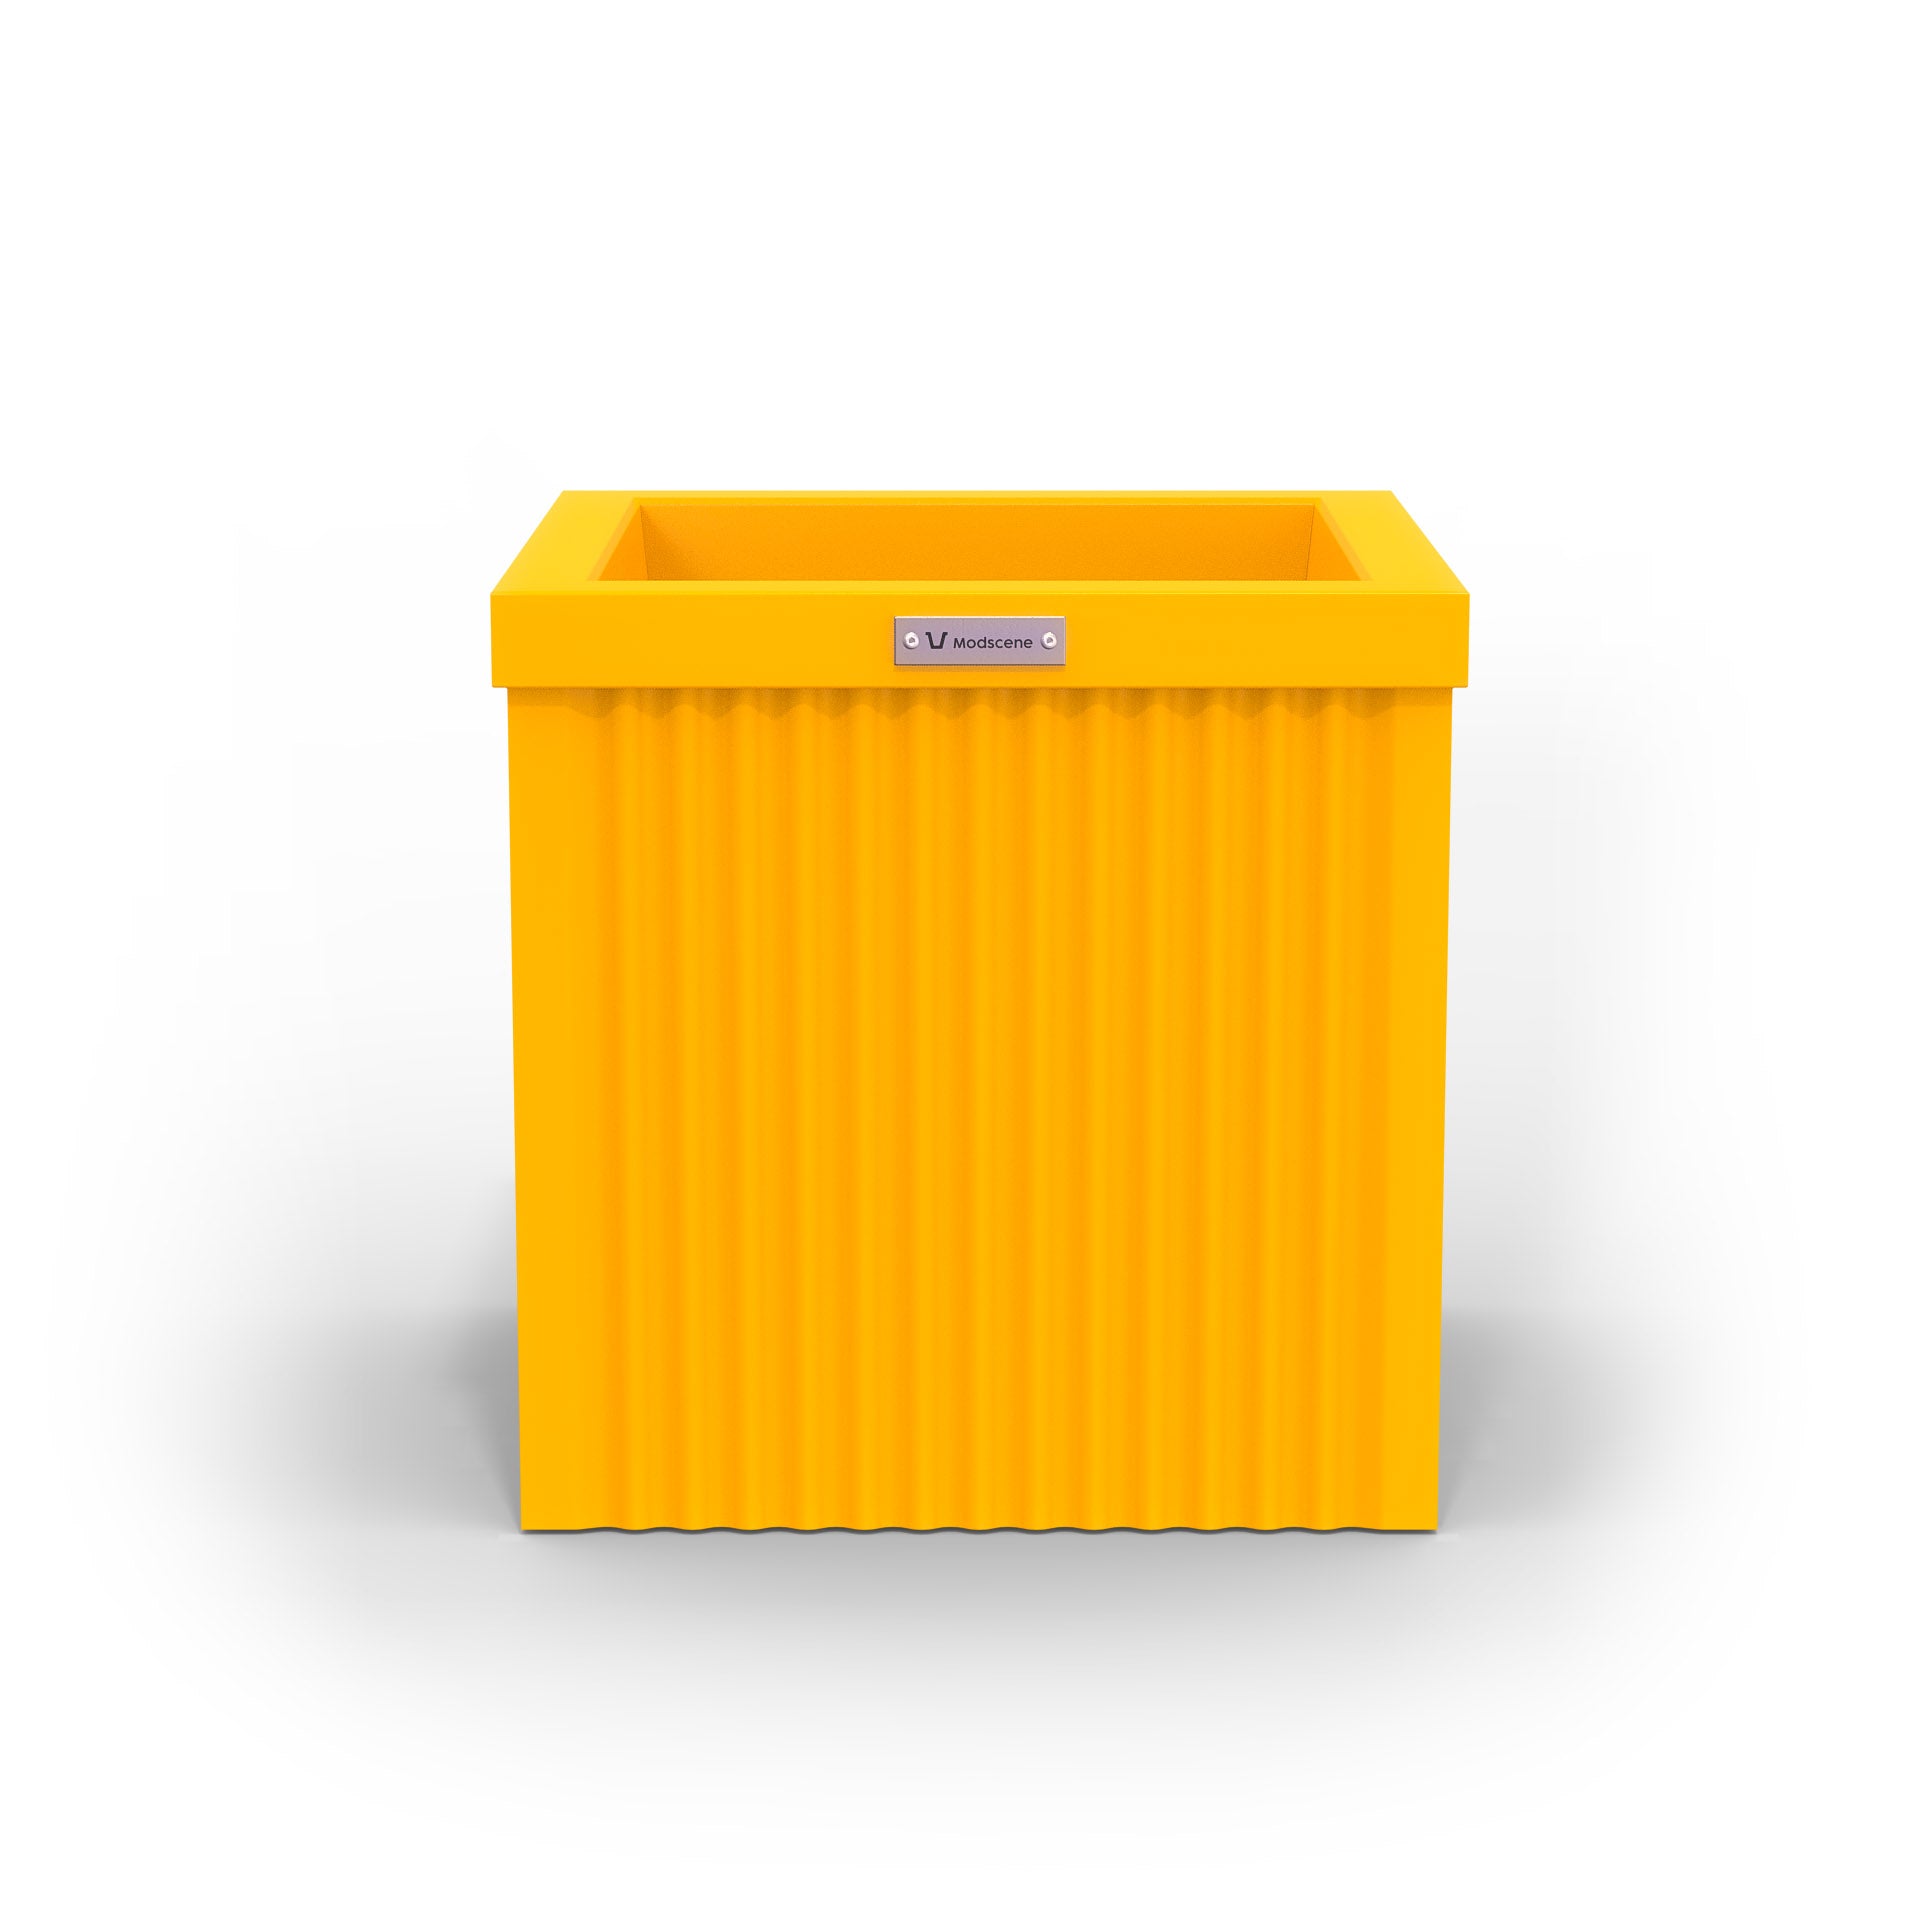 A yellow cube shaped planter pot made by Modscene.